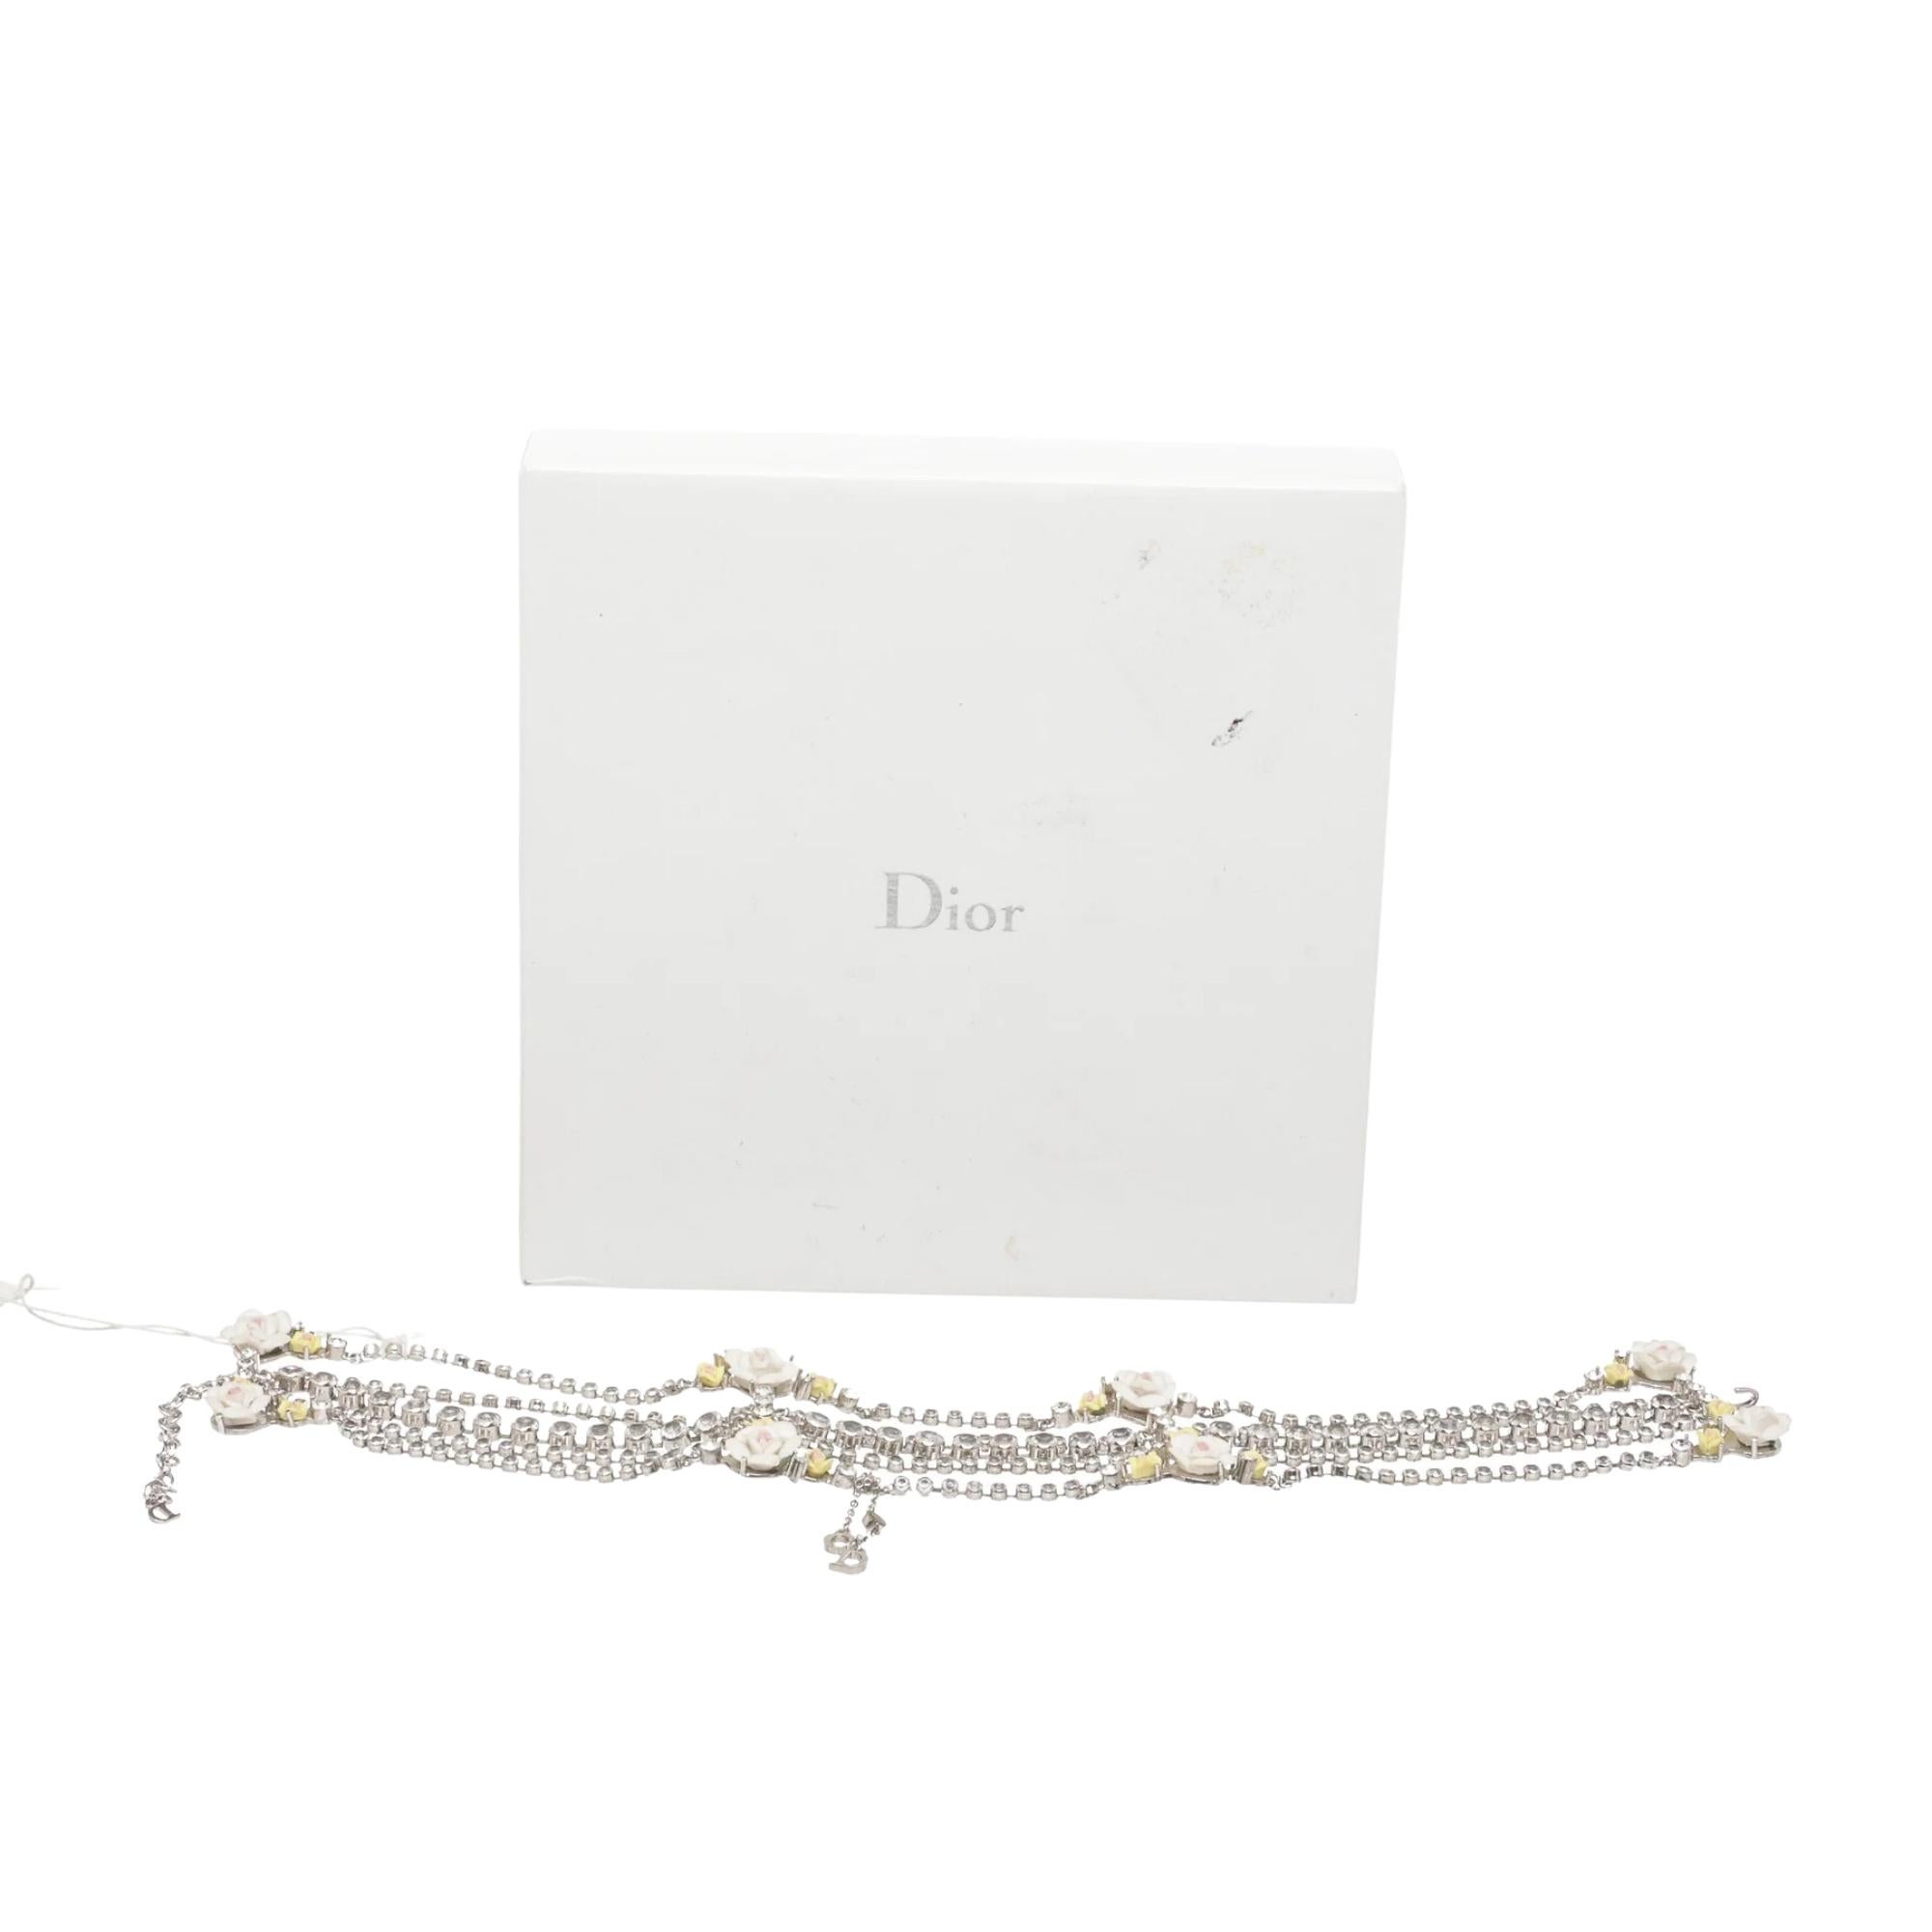 Women's or Men's Dior Vintage Silver Crystal Flower 5 Row Choker Necklace